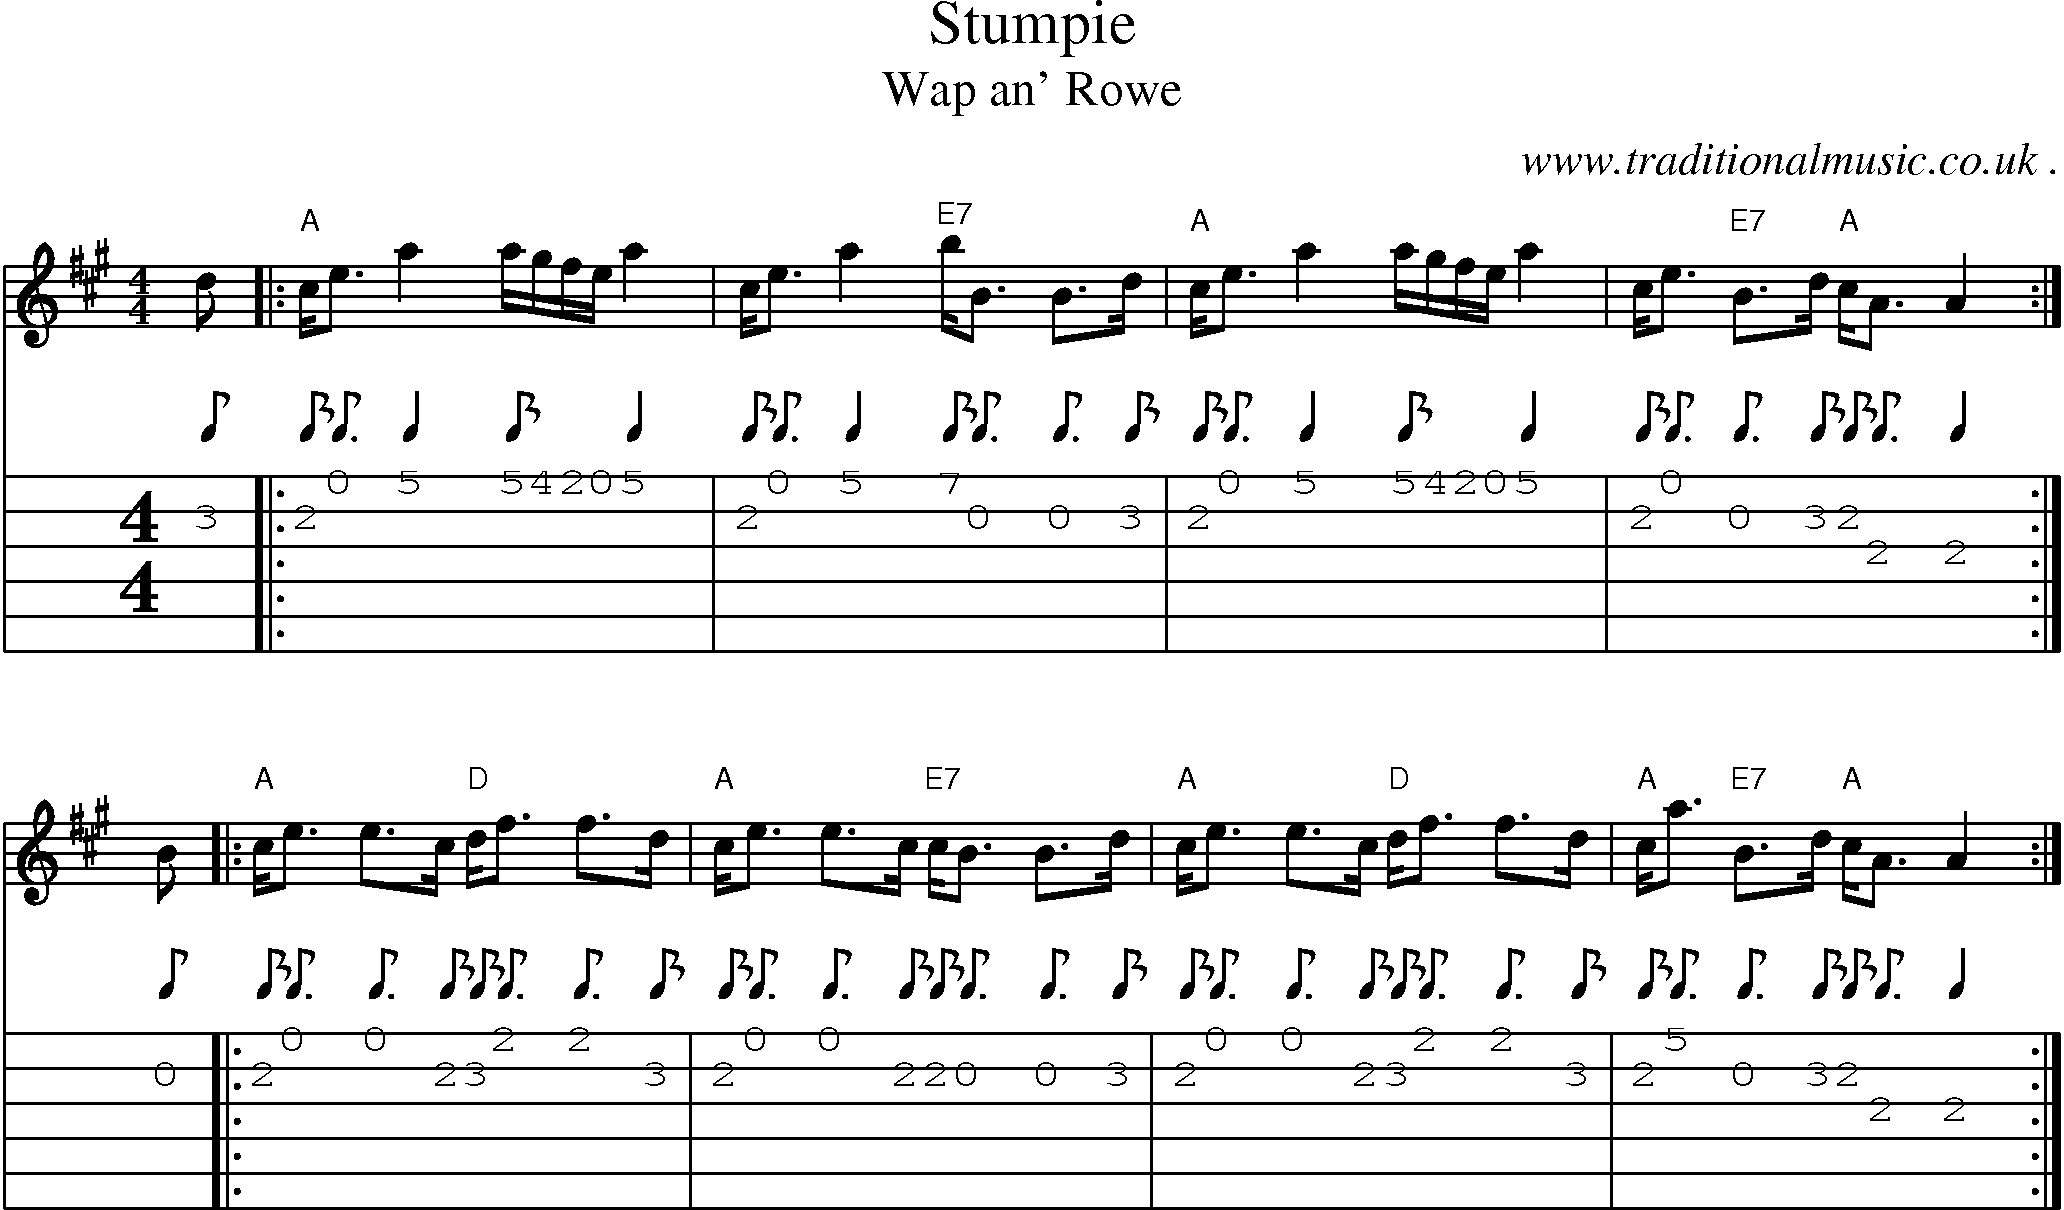 Sheet-music  score, Chords and Guitar Tabs for Stumpie